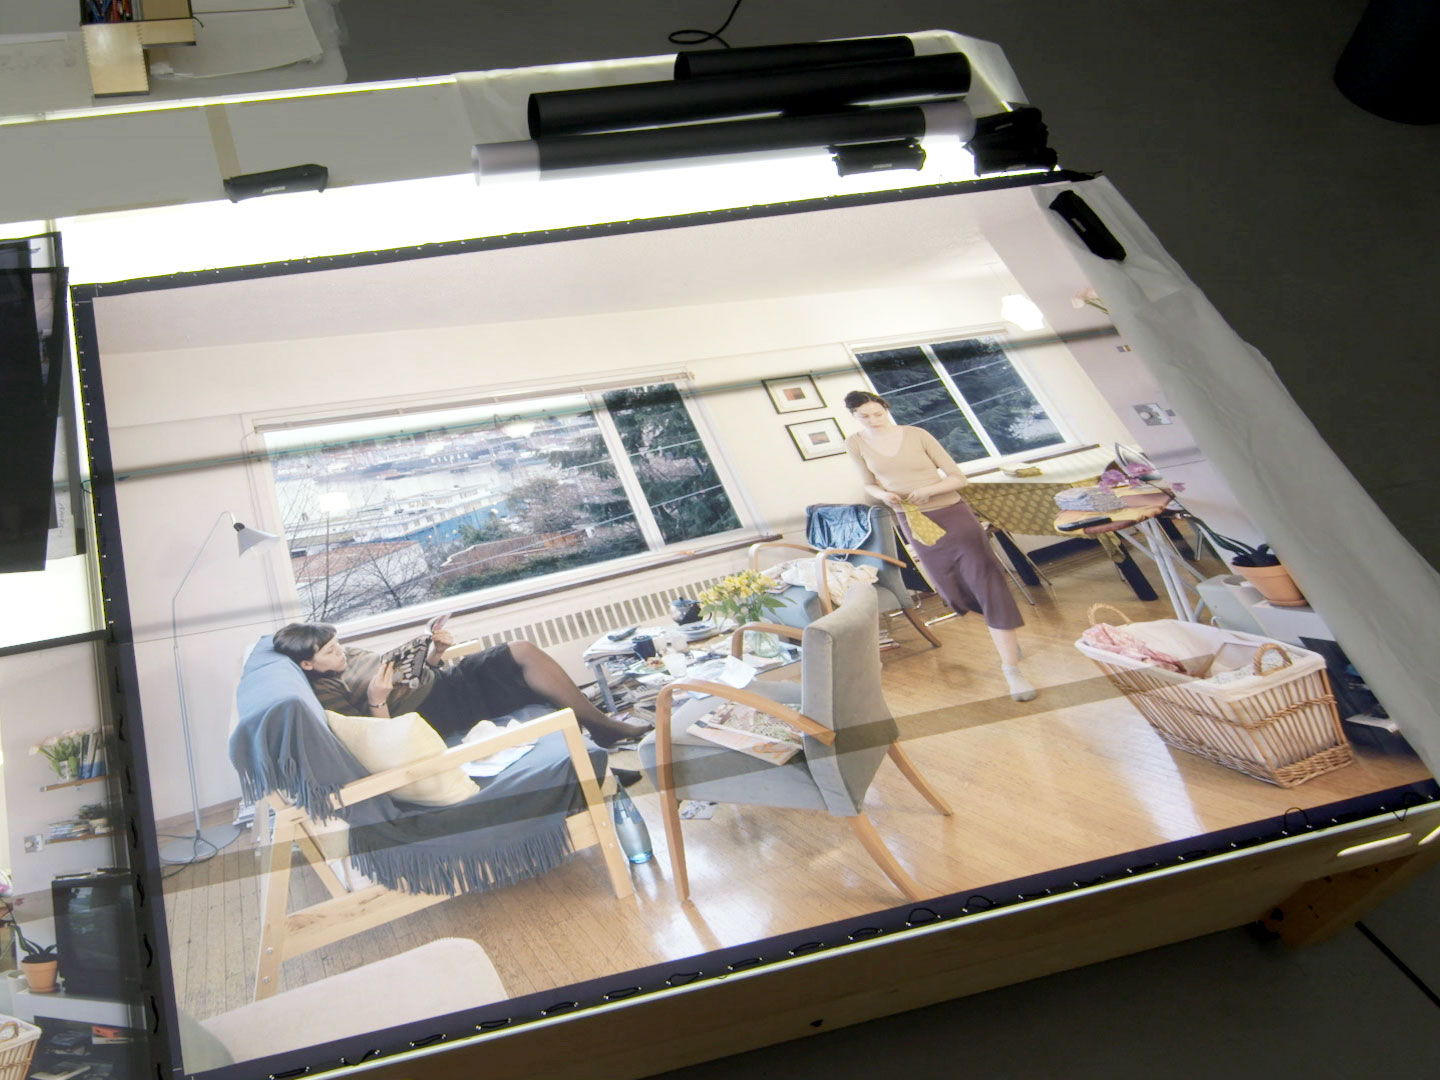 Transparencies of #JeffWall's "A view from an apartment" (2004–05) on a lightbox at the artist's Vancouver studio, as featured in a preview on art21.org from #ART21's upcoming new broadcast season. Production still from ART21’s series Art in the Twenty-First Century, Season 8, 2016. © ART21, Inc. 2016.